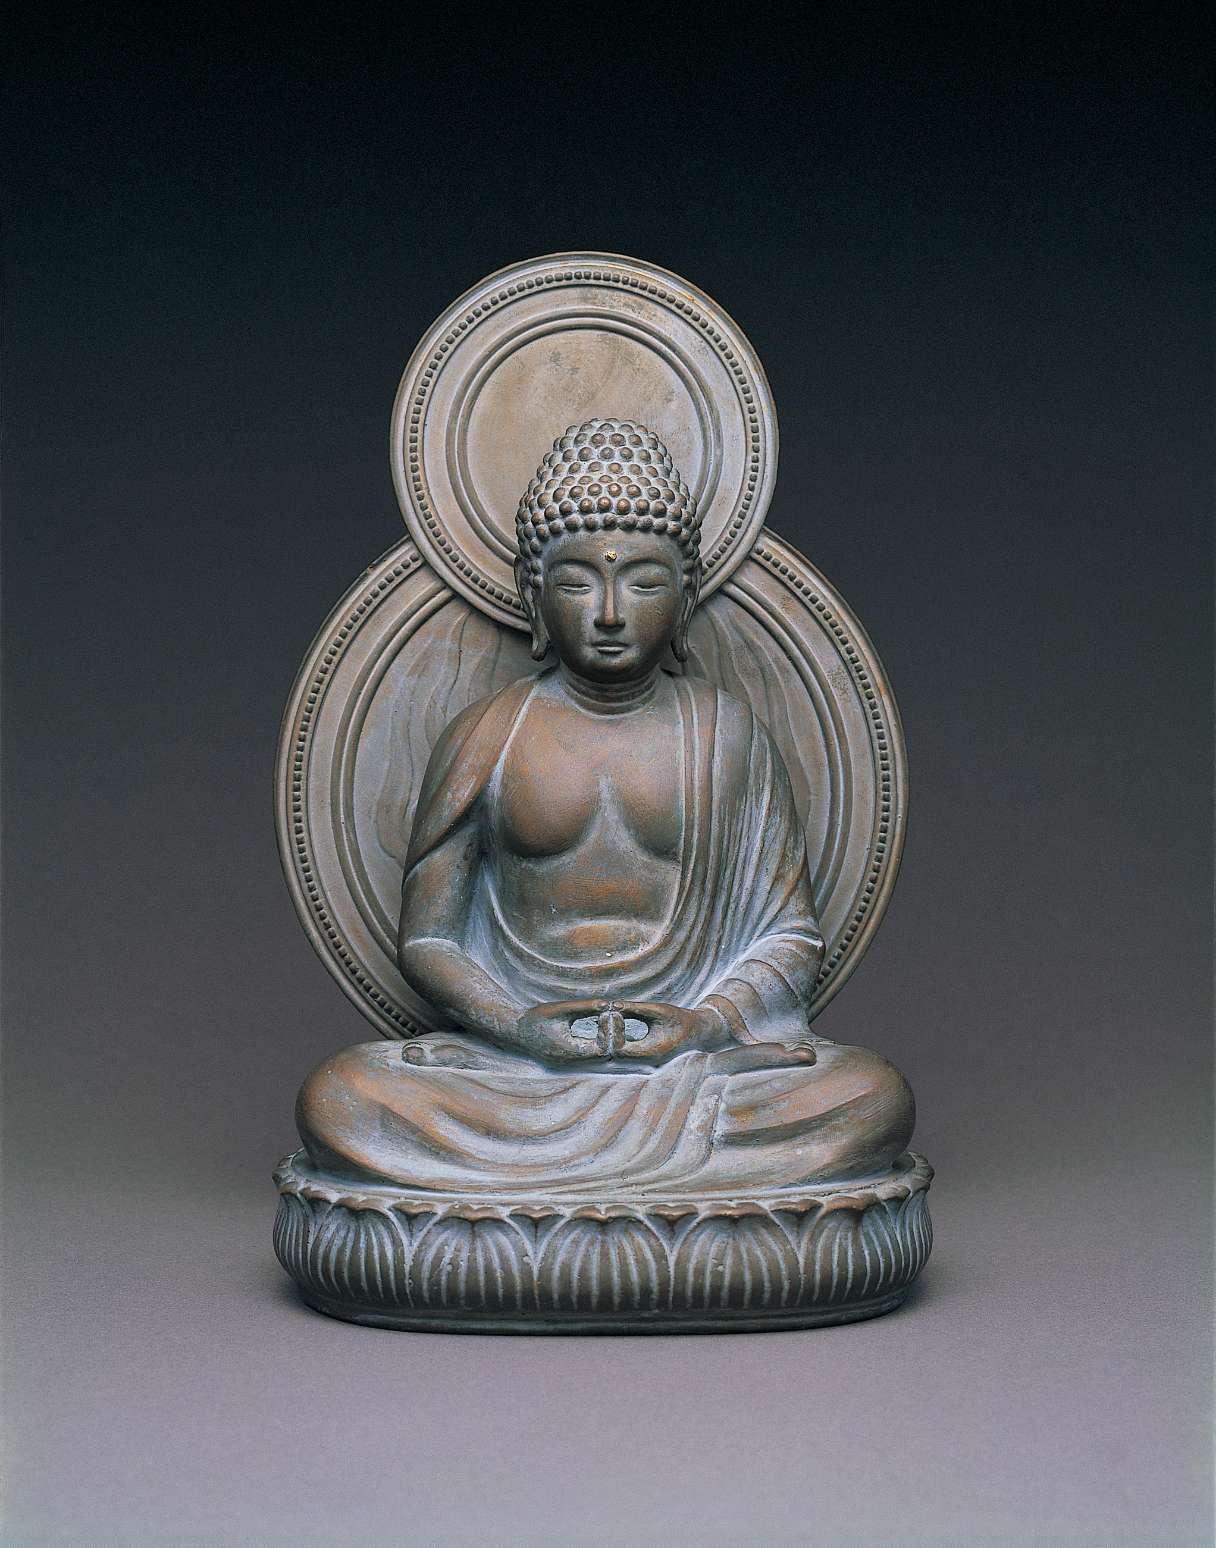 A matte, gray hued statue of a buddha sitting cross-legged atop a seat of curving lotus petals, with a circular nimbus behind his body, hands in meditation.